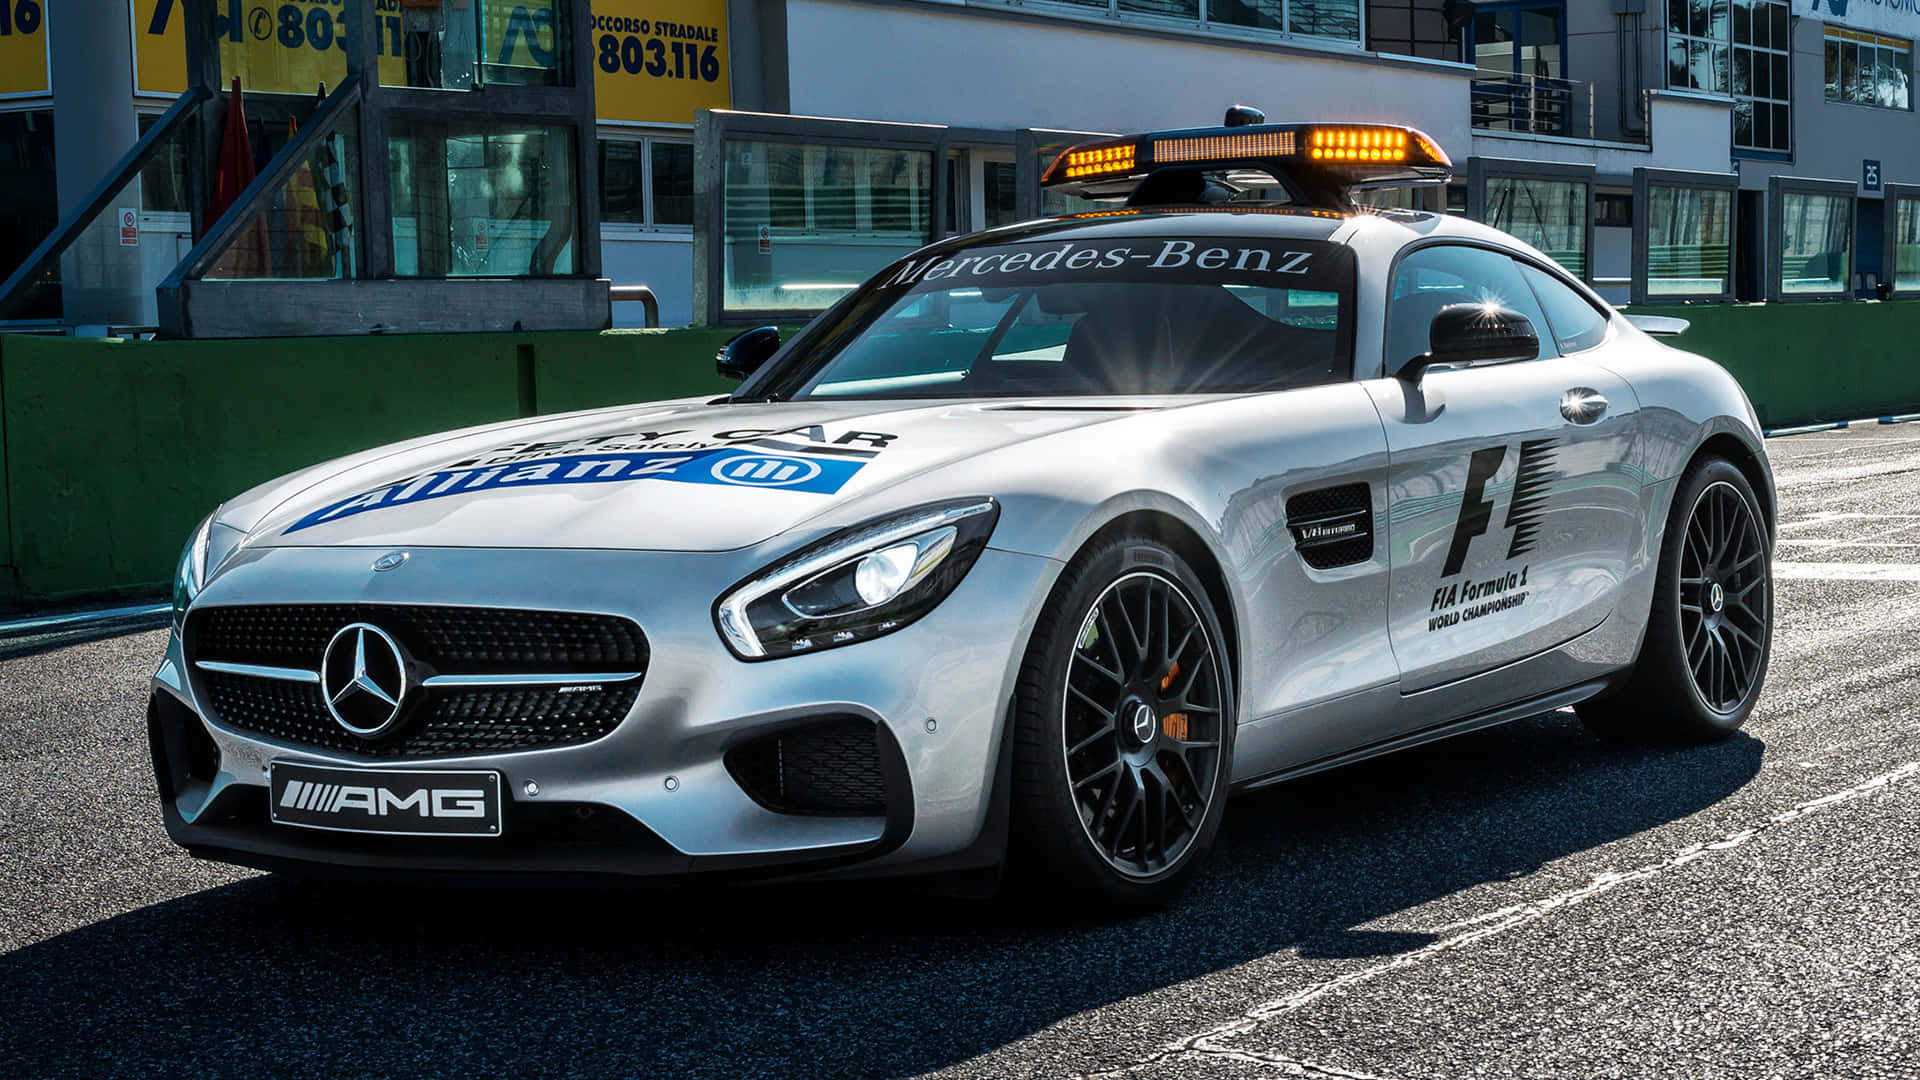 A sleek and modern Safety Car leading the race on the track Wallpaper